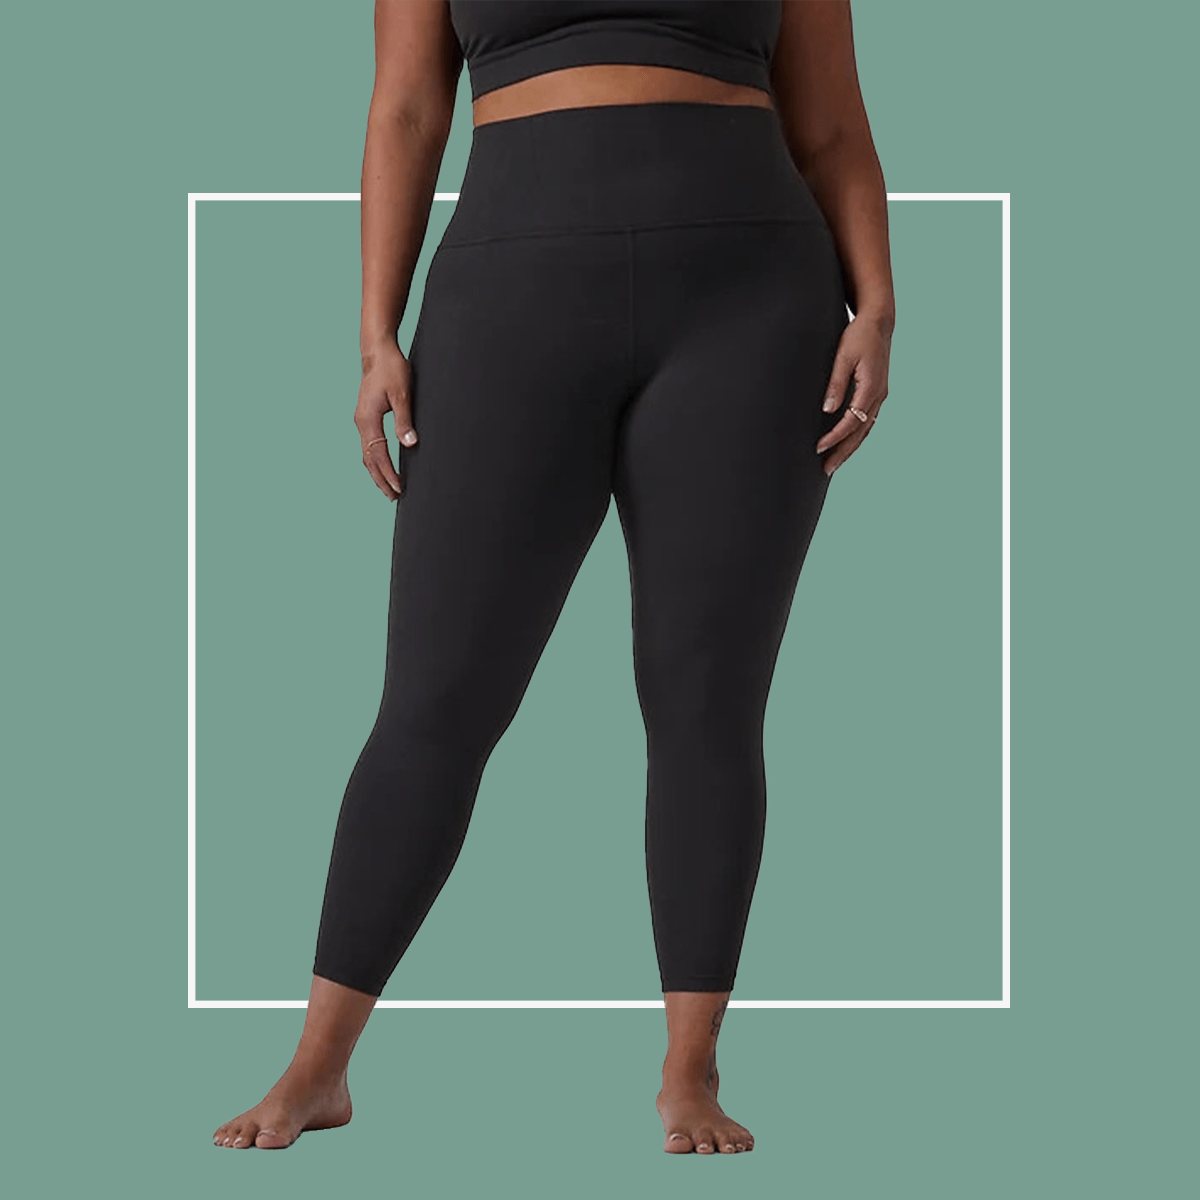 13 Best Leggings for Working Out in Warm Weather 2022